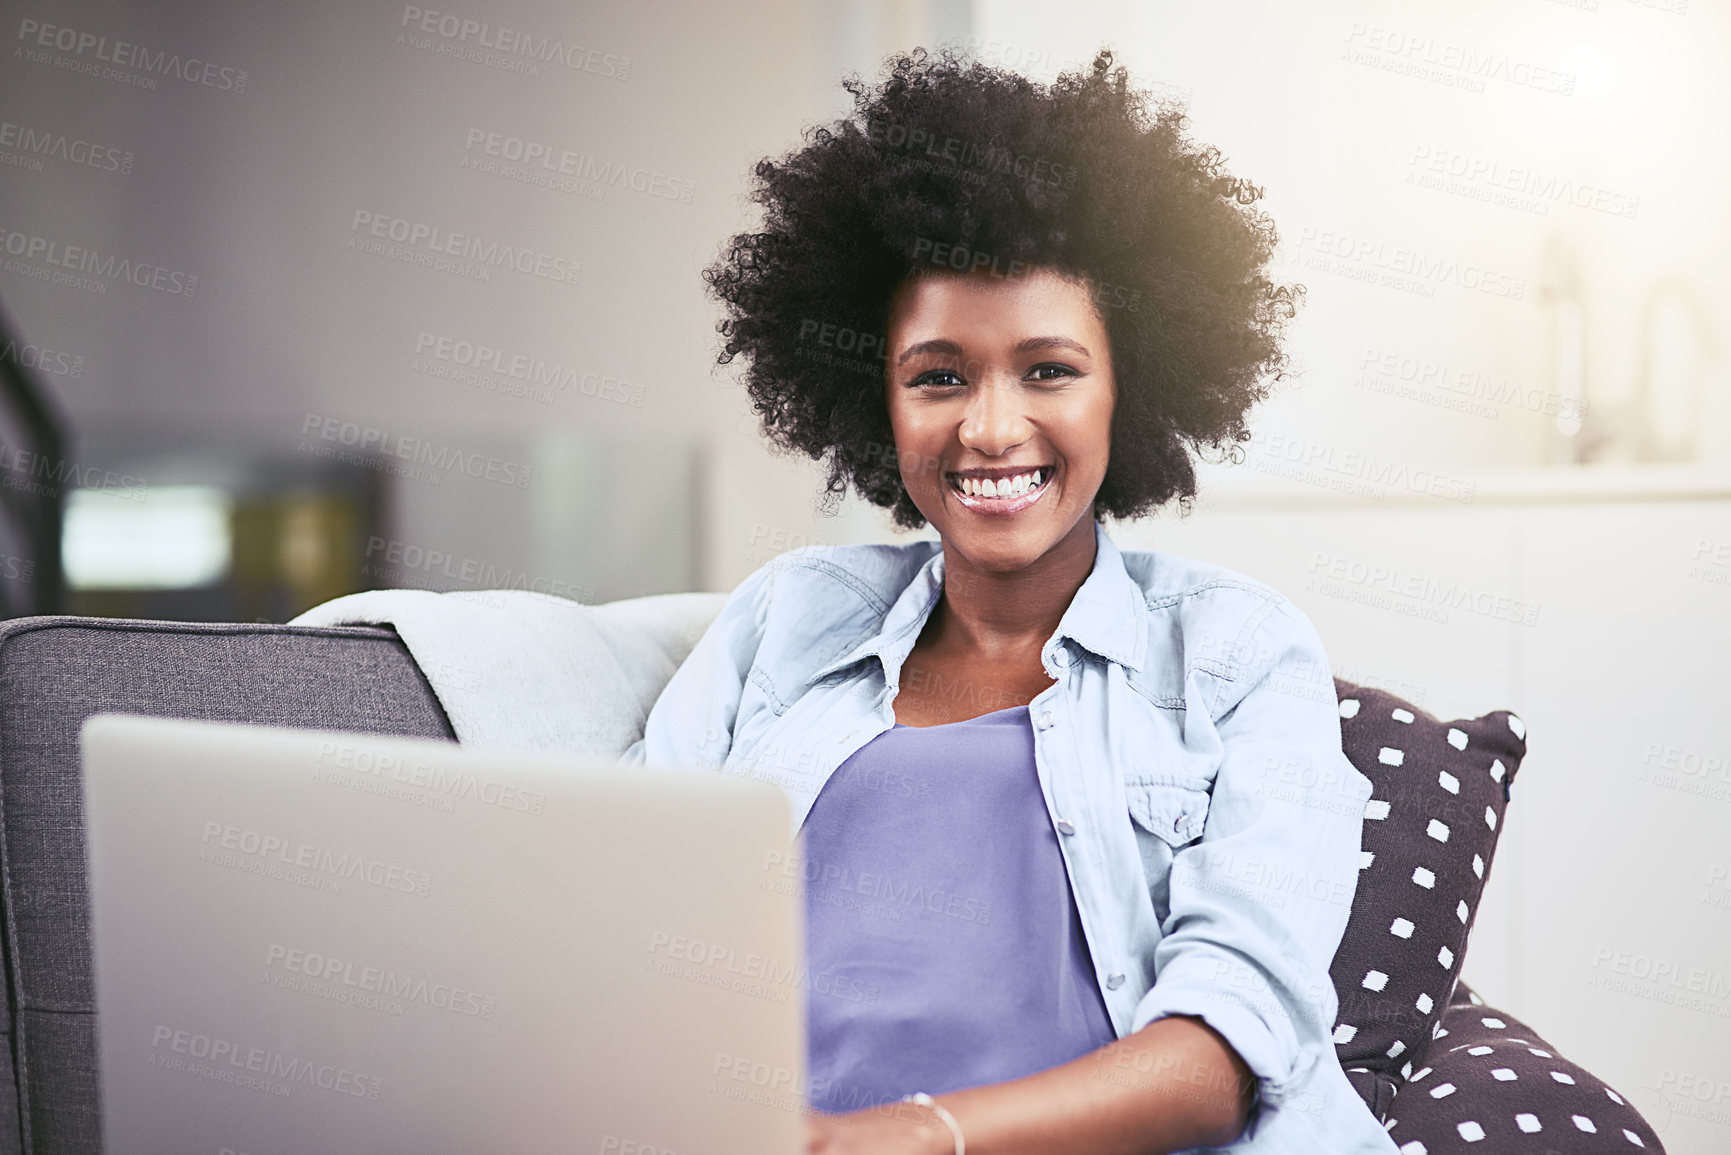 Buy stock photo Shot of a young woman using a laptop on the sofa at home